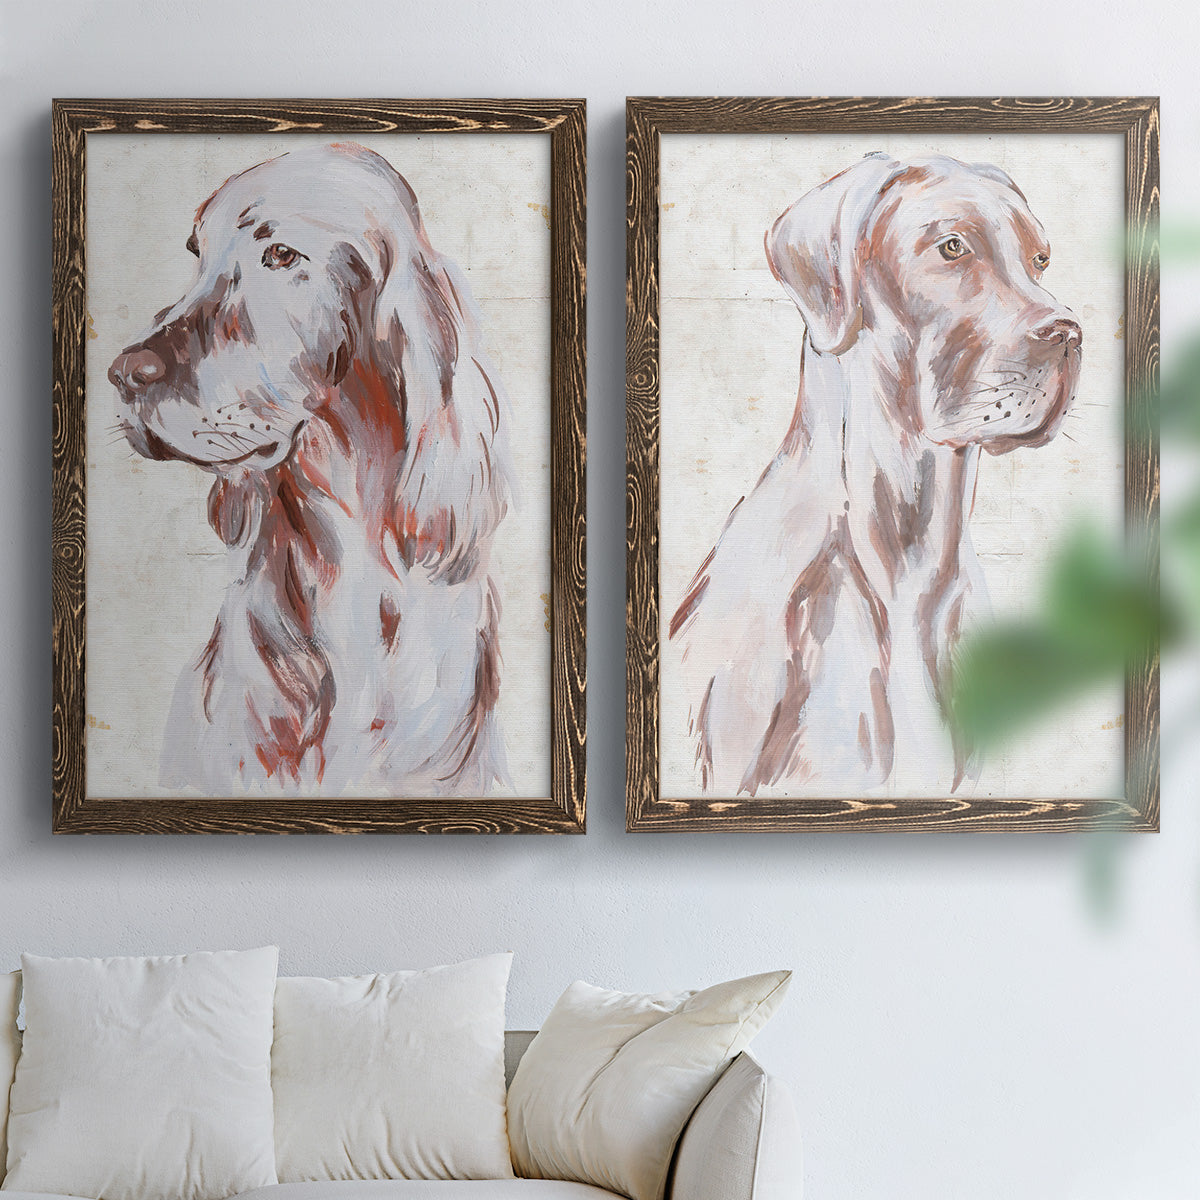 Sitting Dog III - Premium Framed Canvas 2 Piece Set - Ready to Hang